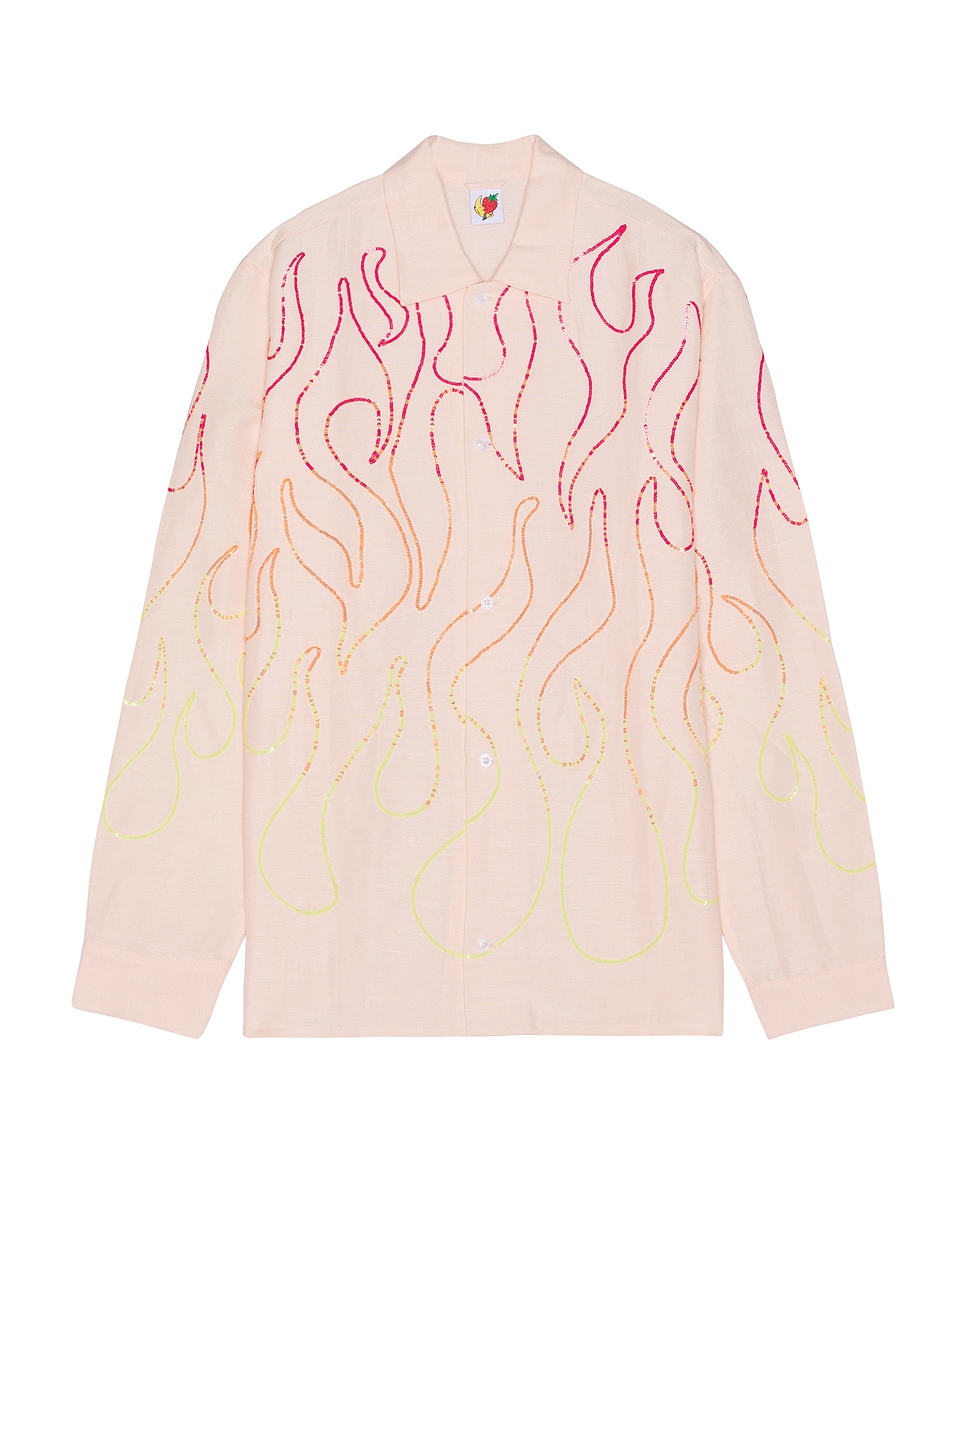 Image 1 of Sky High Farm Workwear Flame Embroidered Shirt in Pink